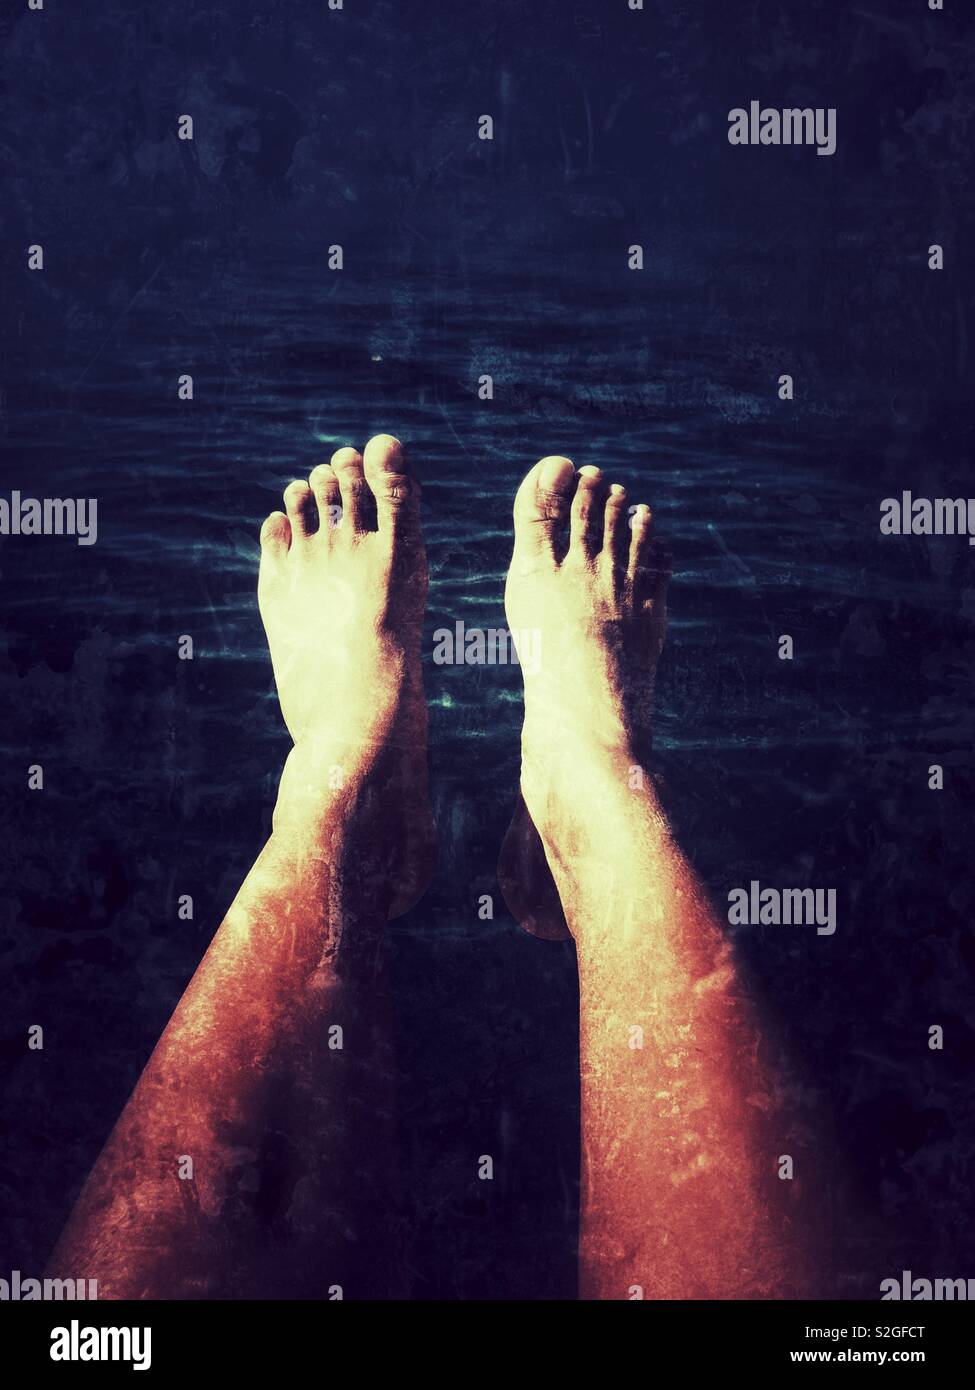 A pair of legs submerged into dark blue water Stock Photo